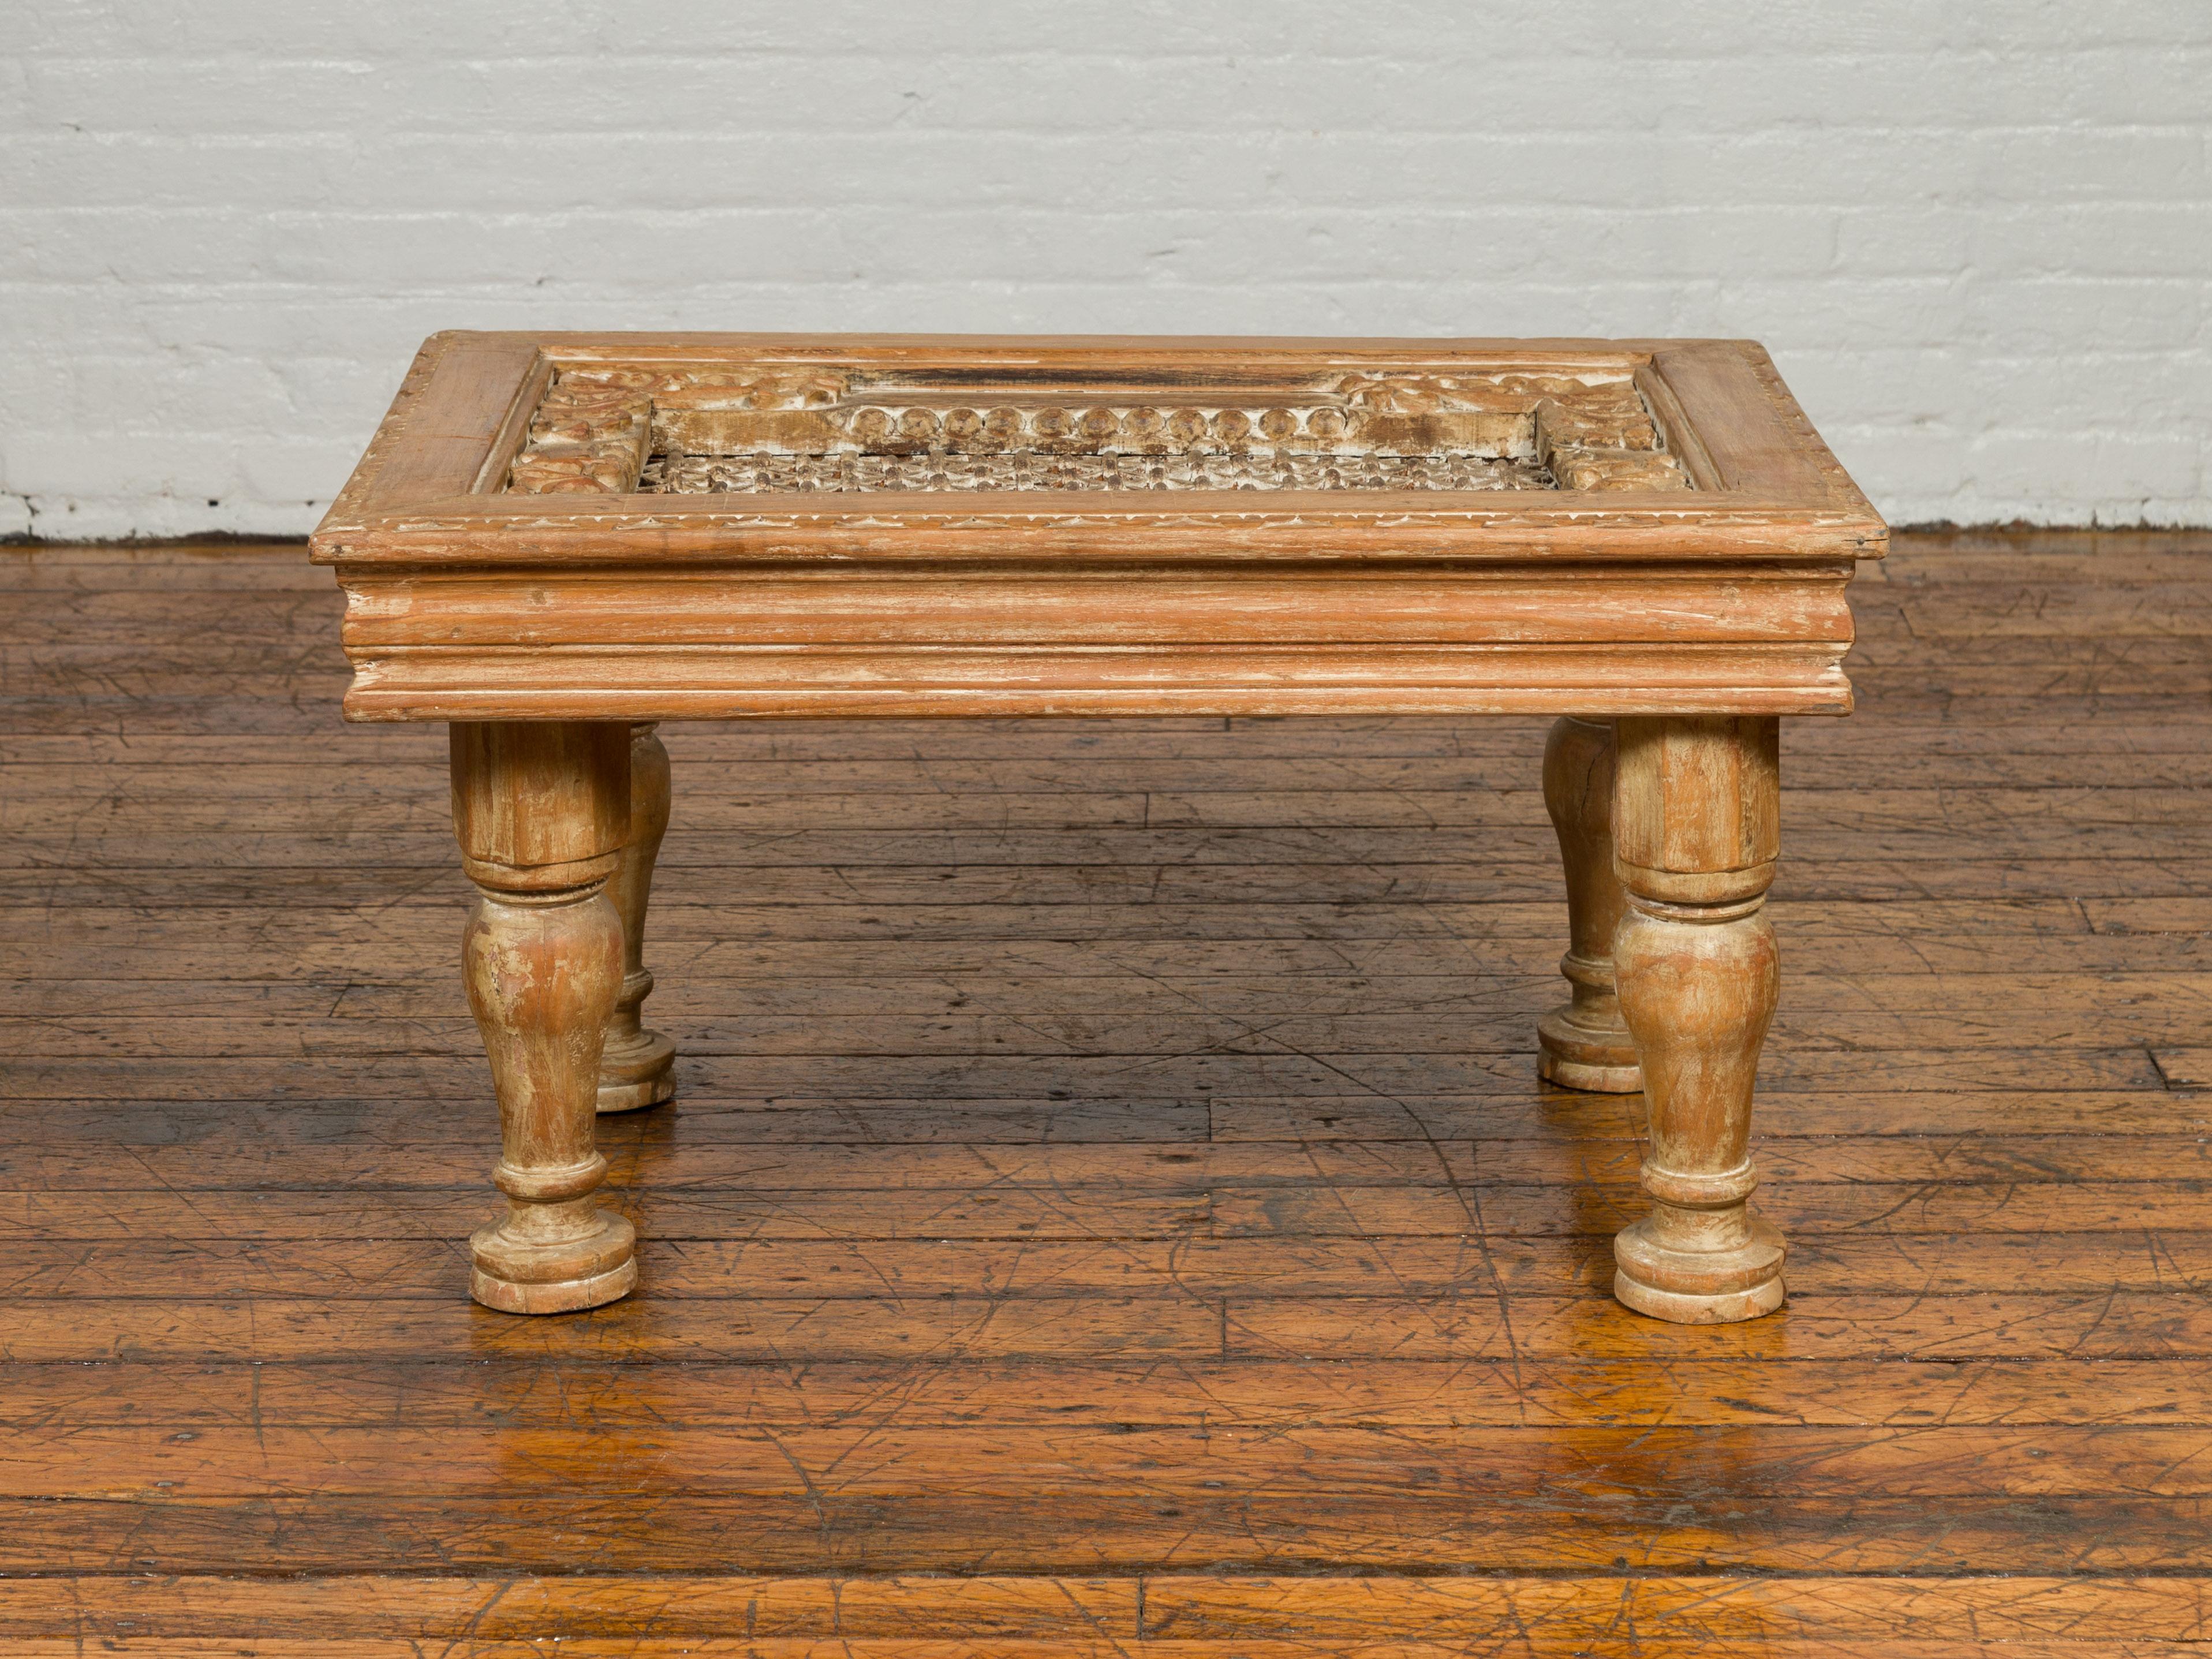 An Indian sheesham wood cocktail table from the early 20th century, with window grate top and turned legs. Born in India during the early years of the 20th century, this cocktail table features a rectangular iron top surrounded by carved foliage.